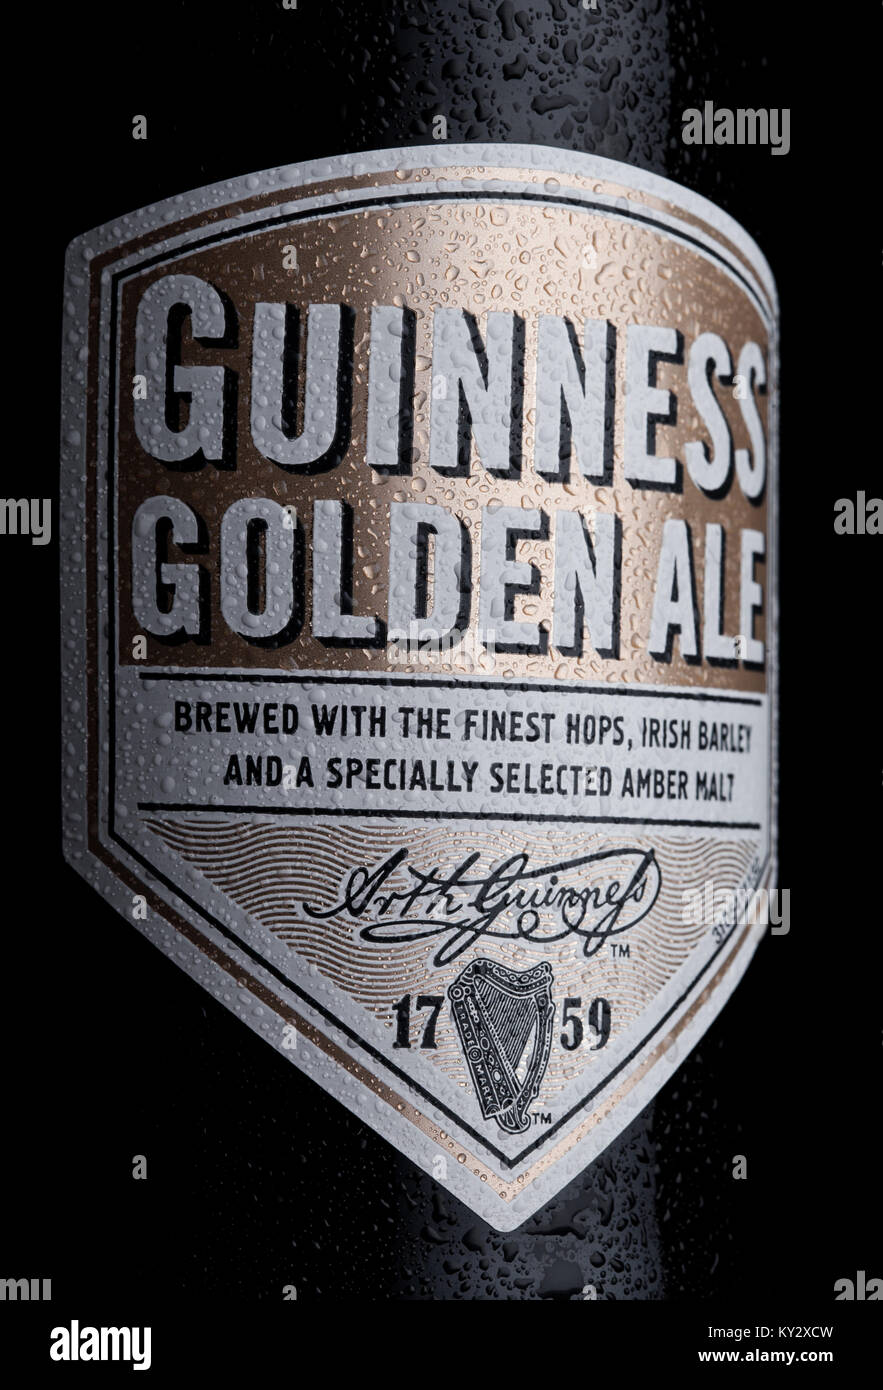 LONDON, UK - JANUARY 02, 2018:  Bottle label of Guinness golden ale beer on white background. Guinness beer has been produced since 1759 in Dublin, Ir Stock Photo